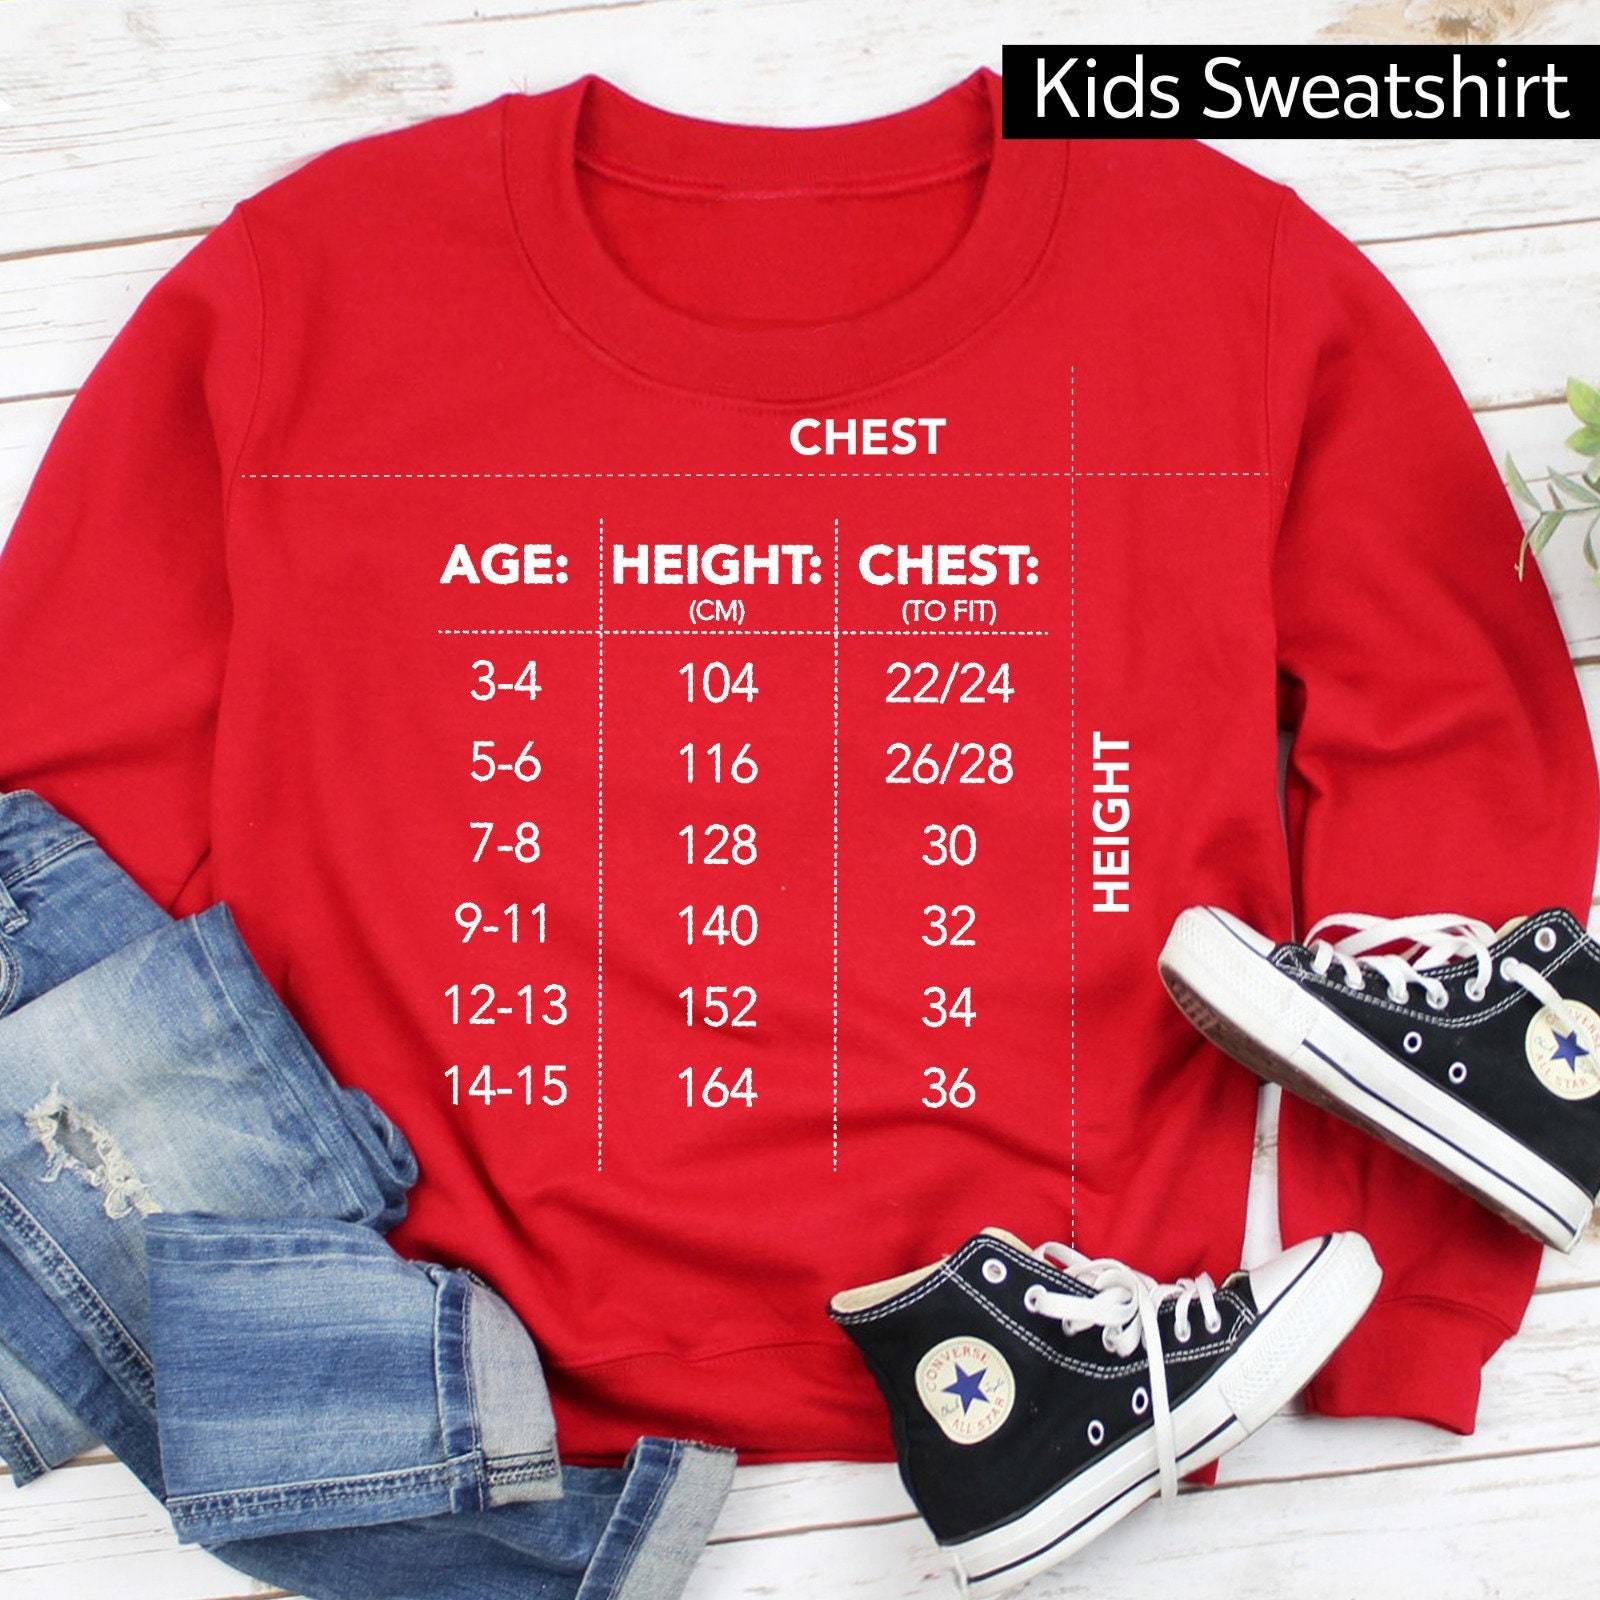 Colourful Merry Christmas jumper, Unisex Adult, Young, Kids sizes, Xmas gift